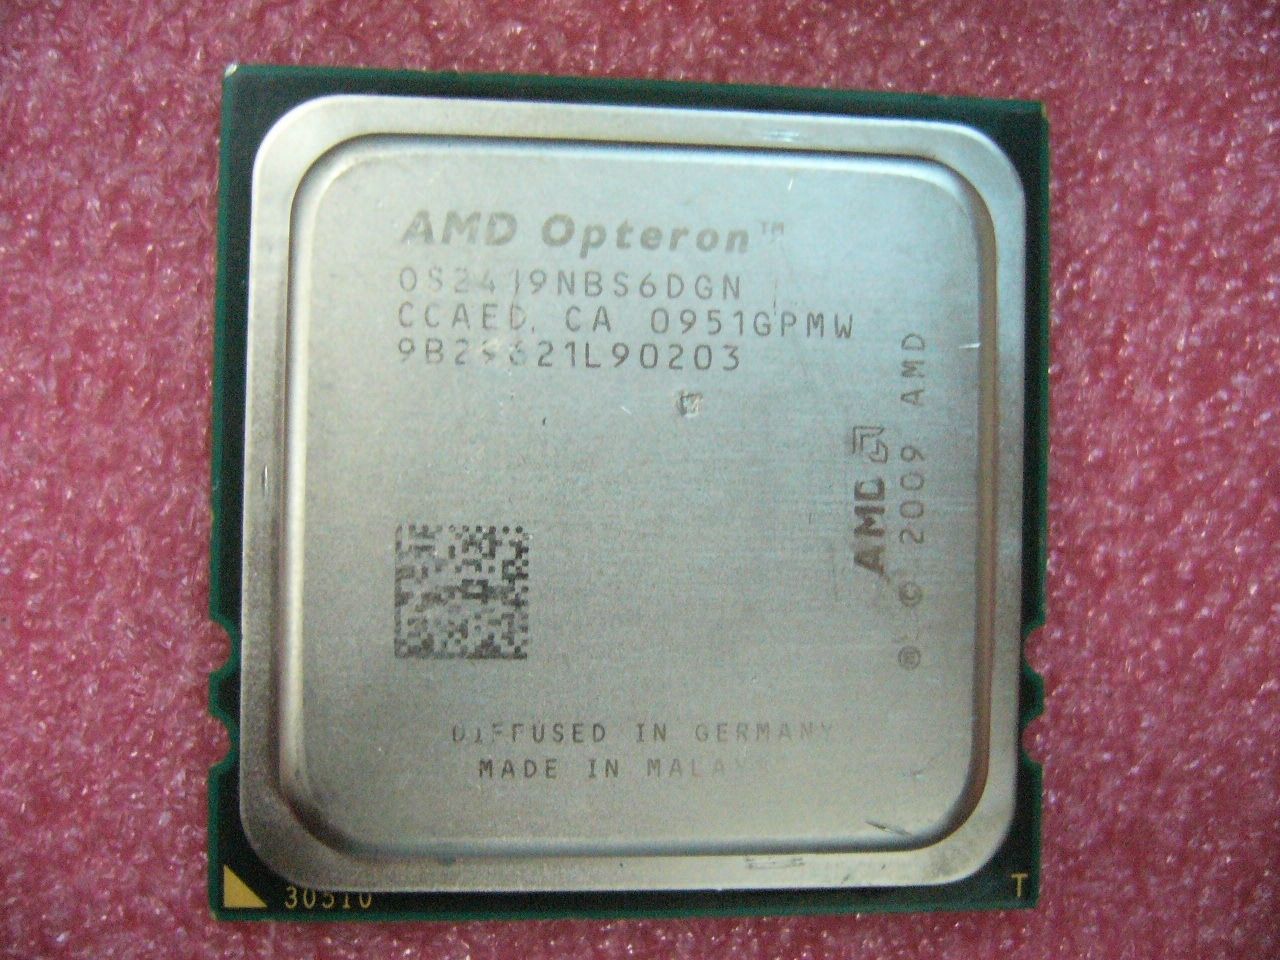 QTY 1x AMD Opteron 2419 EE 1.8 GHz Six Core (OS2419NBS6DGN) CPU Socket F 1207 - Click Image to Close